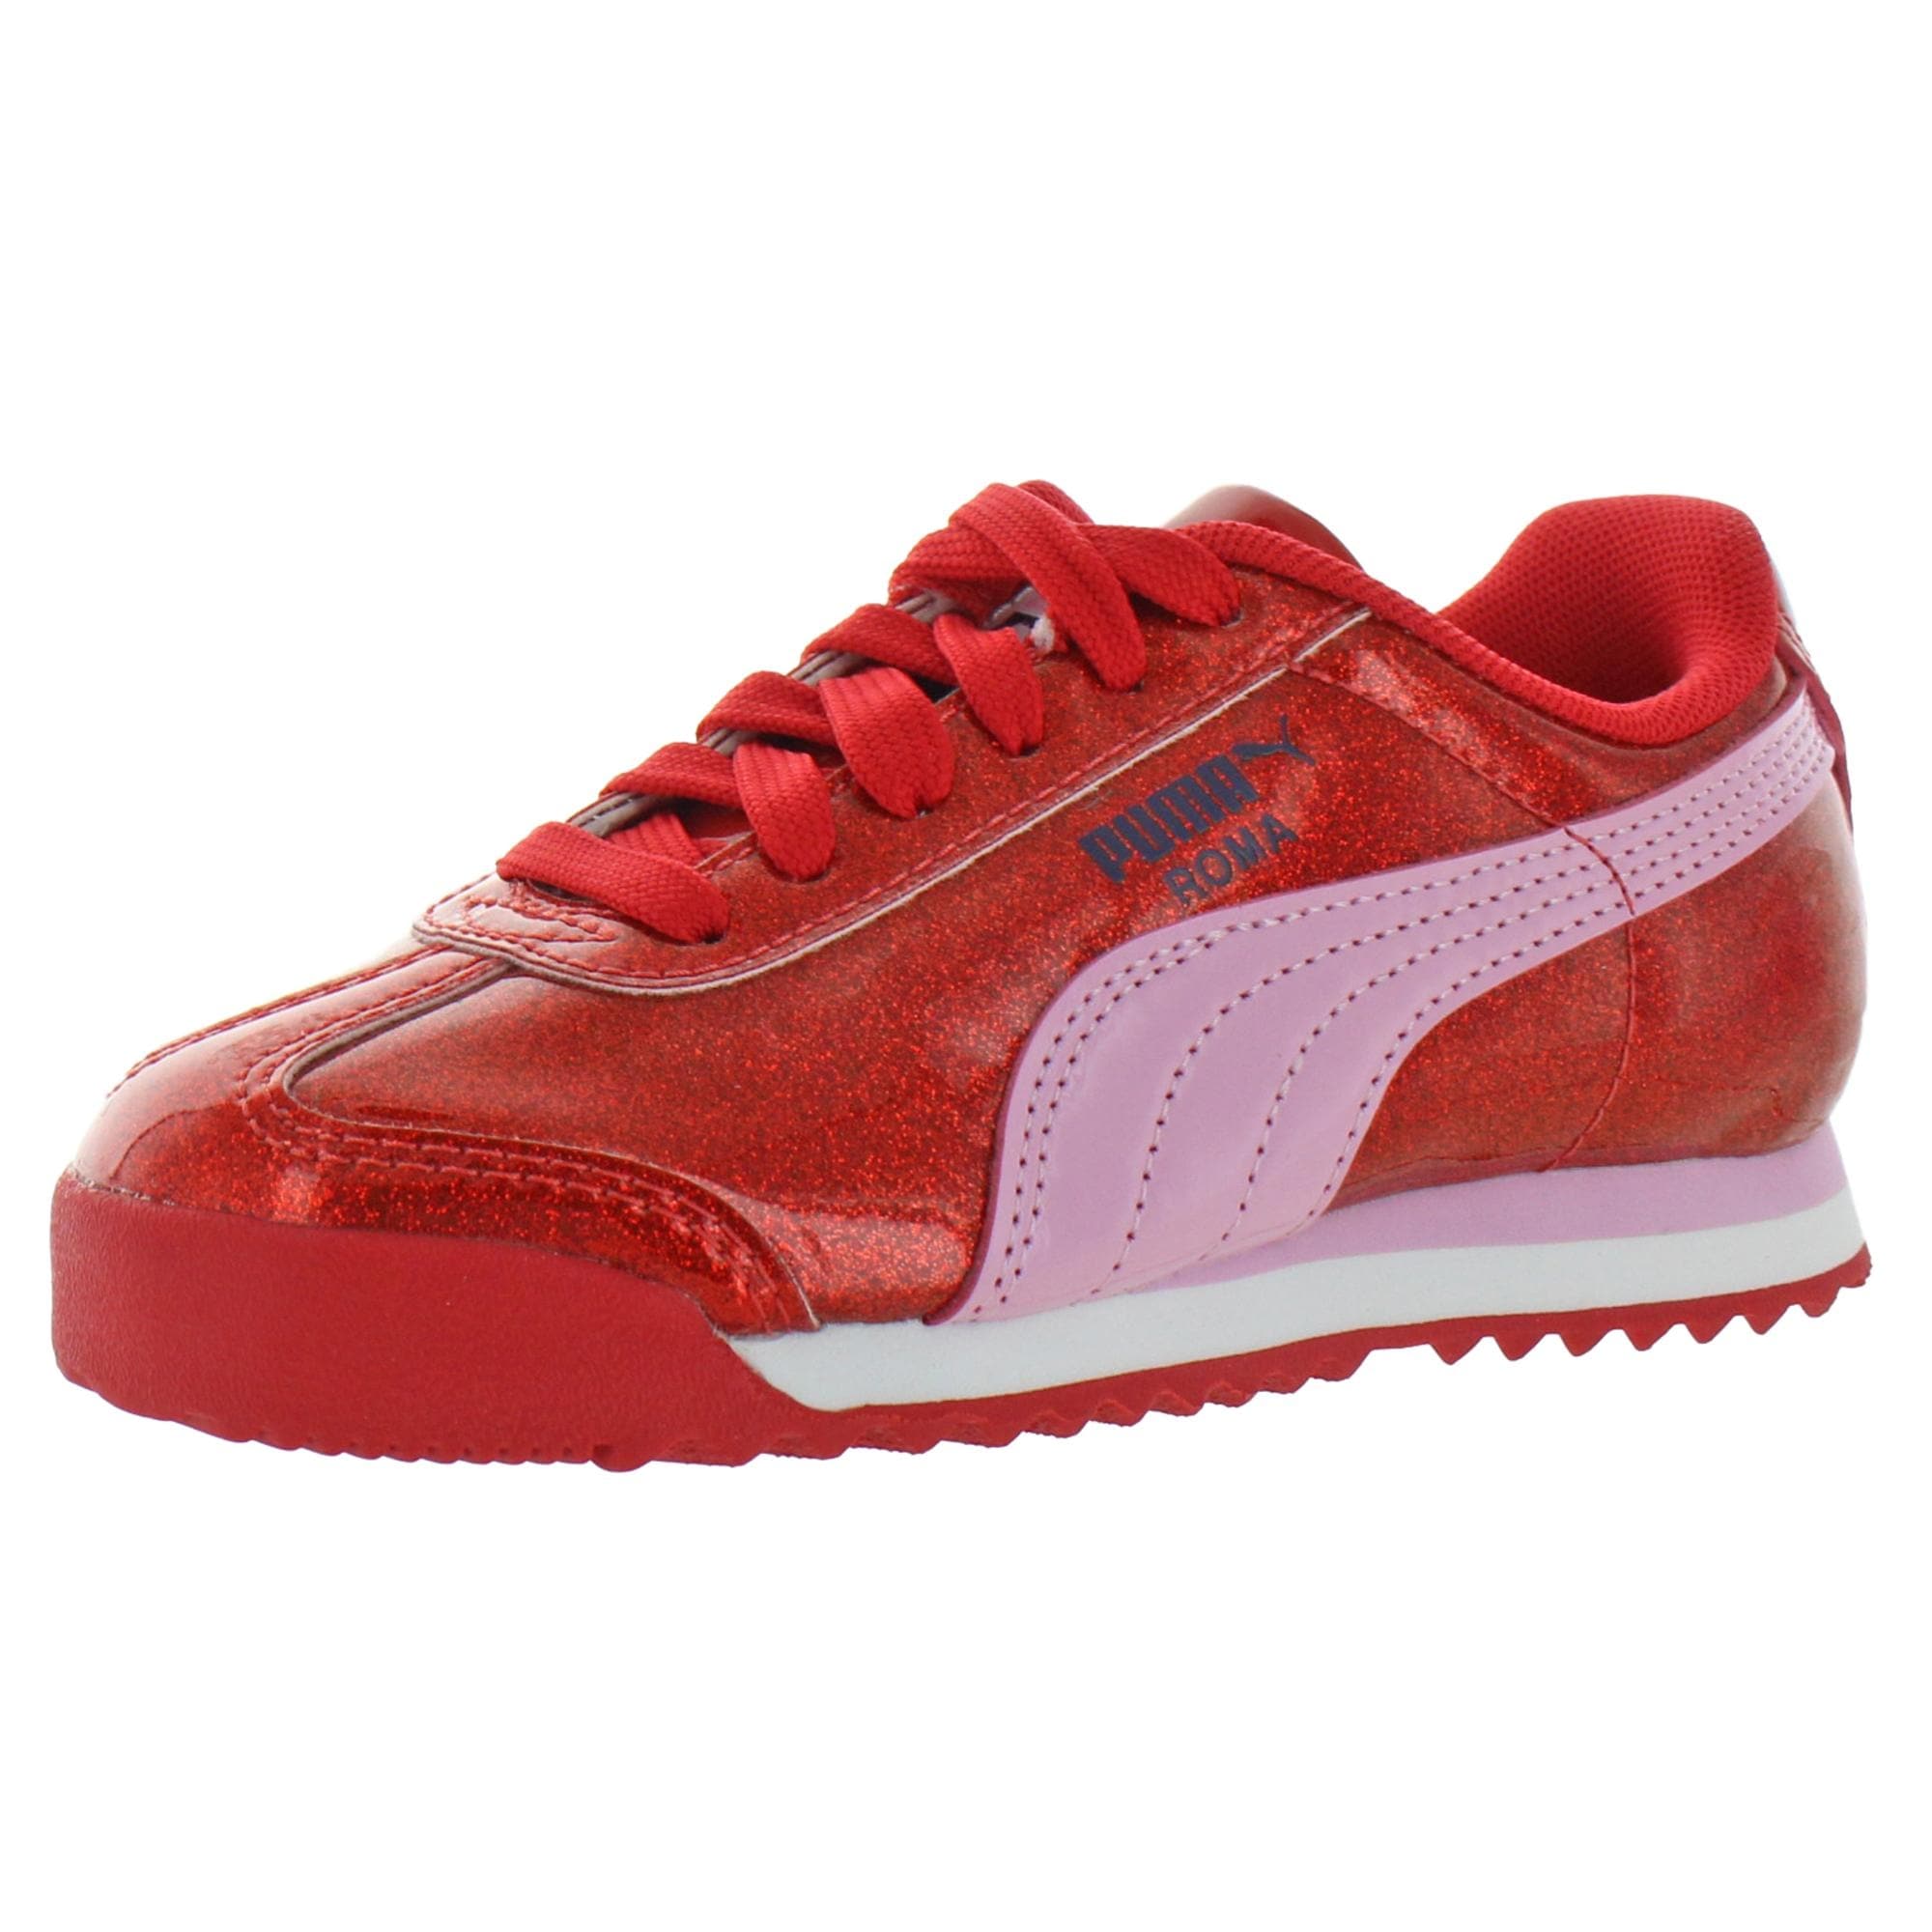 Shop Puma Girls Roma Glam PS Sneakers 